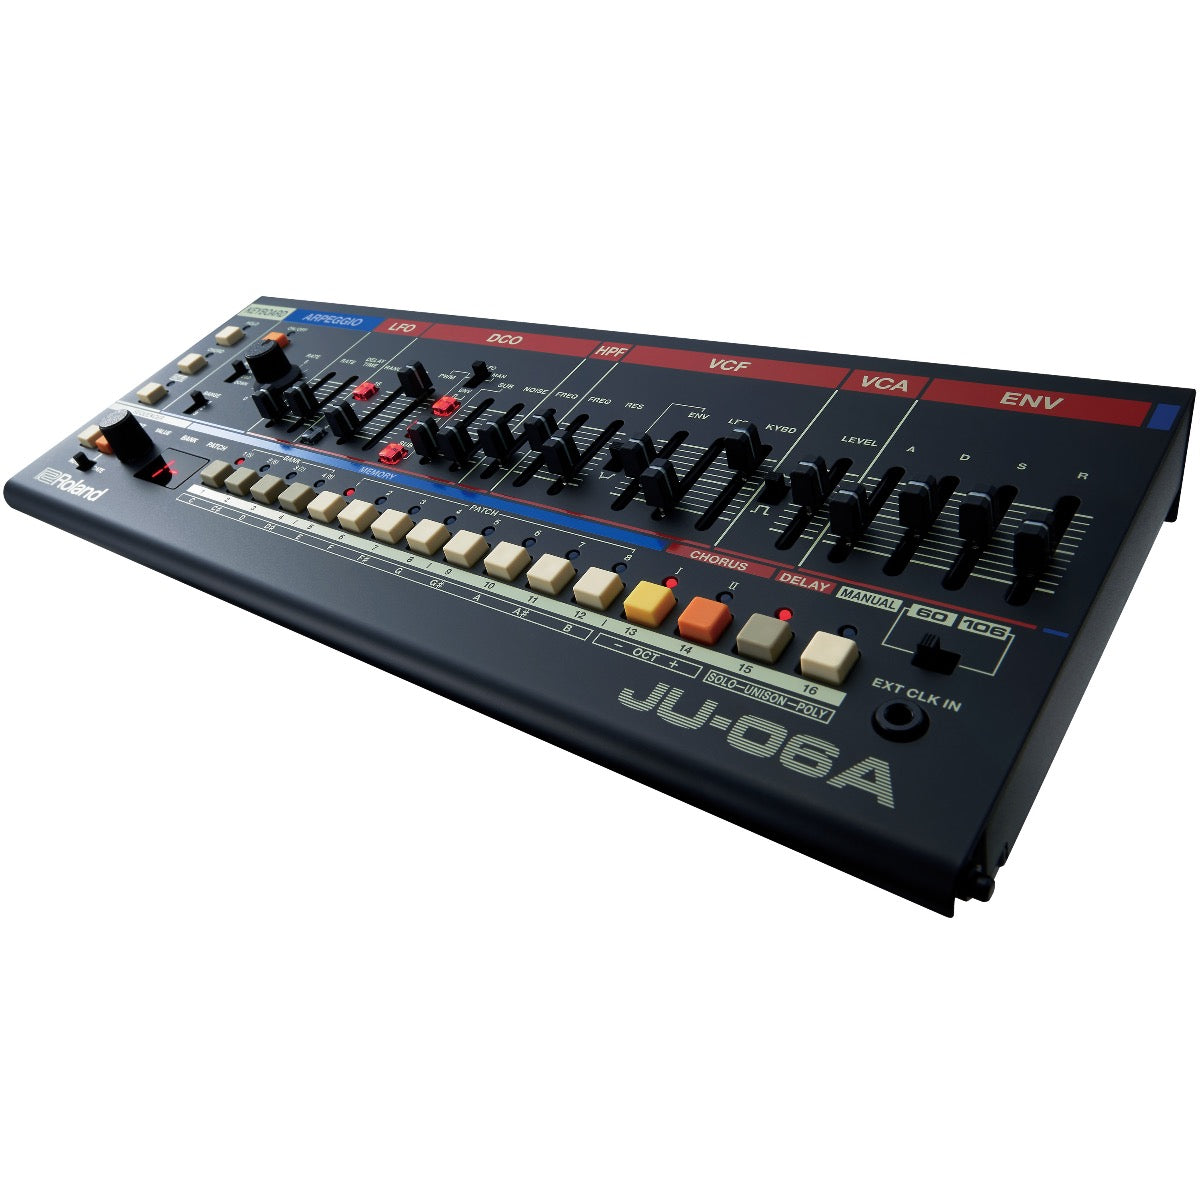 3/4 view of Roland Boutique JU-06A showing top, front and right side